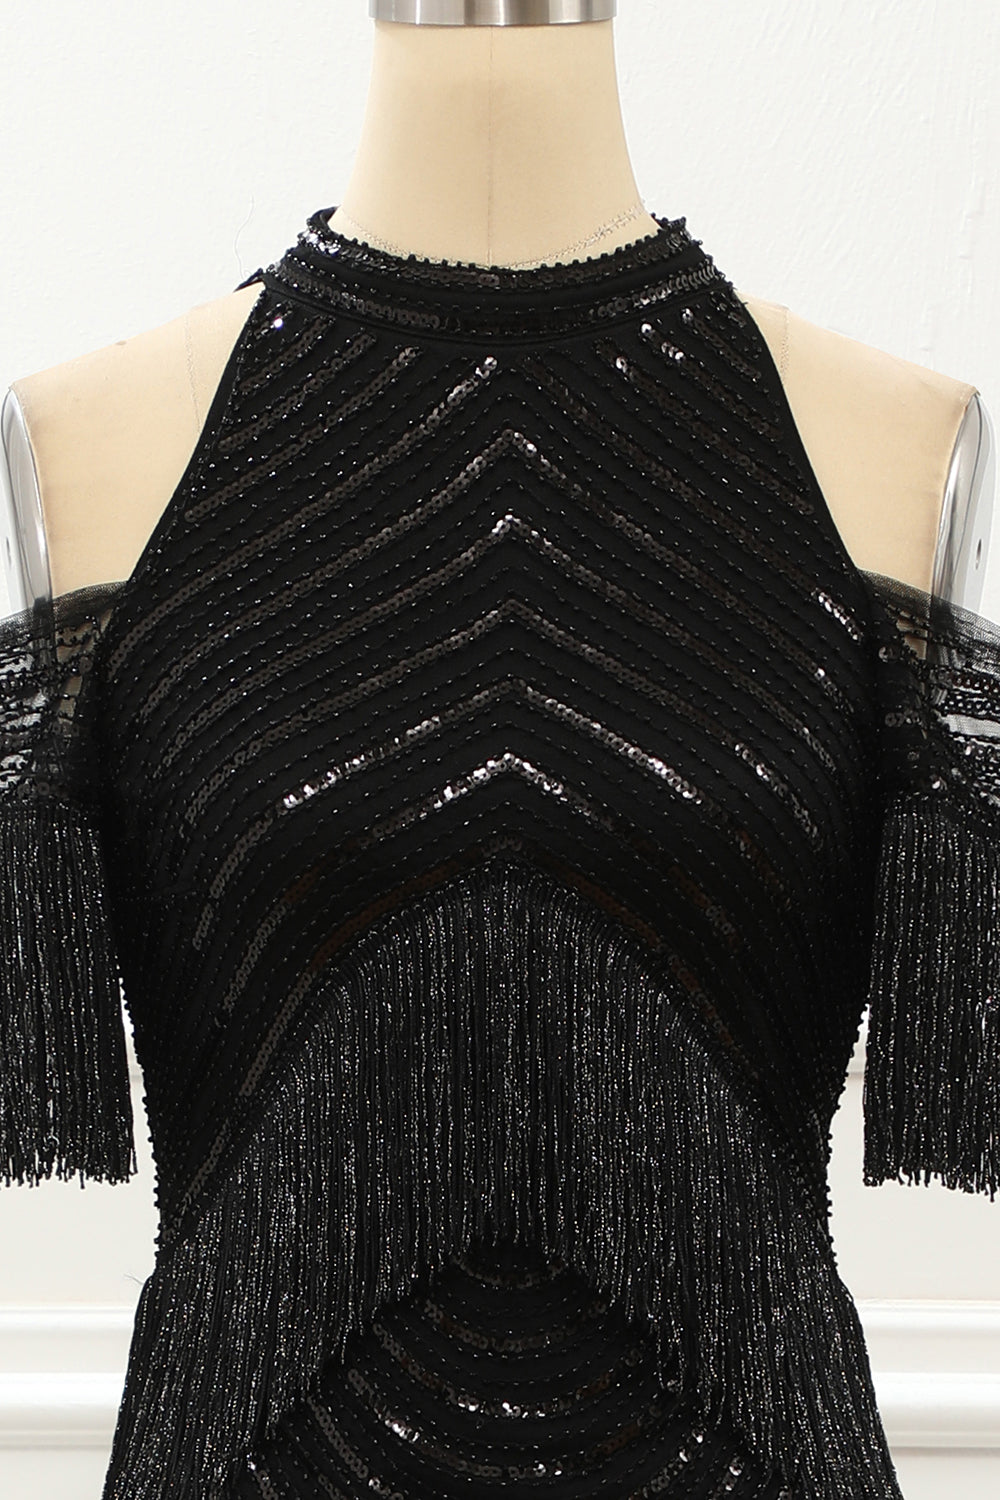 Prom Dress Boutiques Near Me, Black Halter Sequin Glitter Prom Dress with Fringes